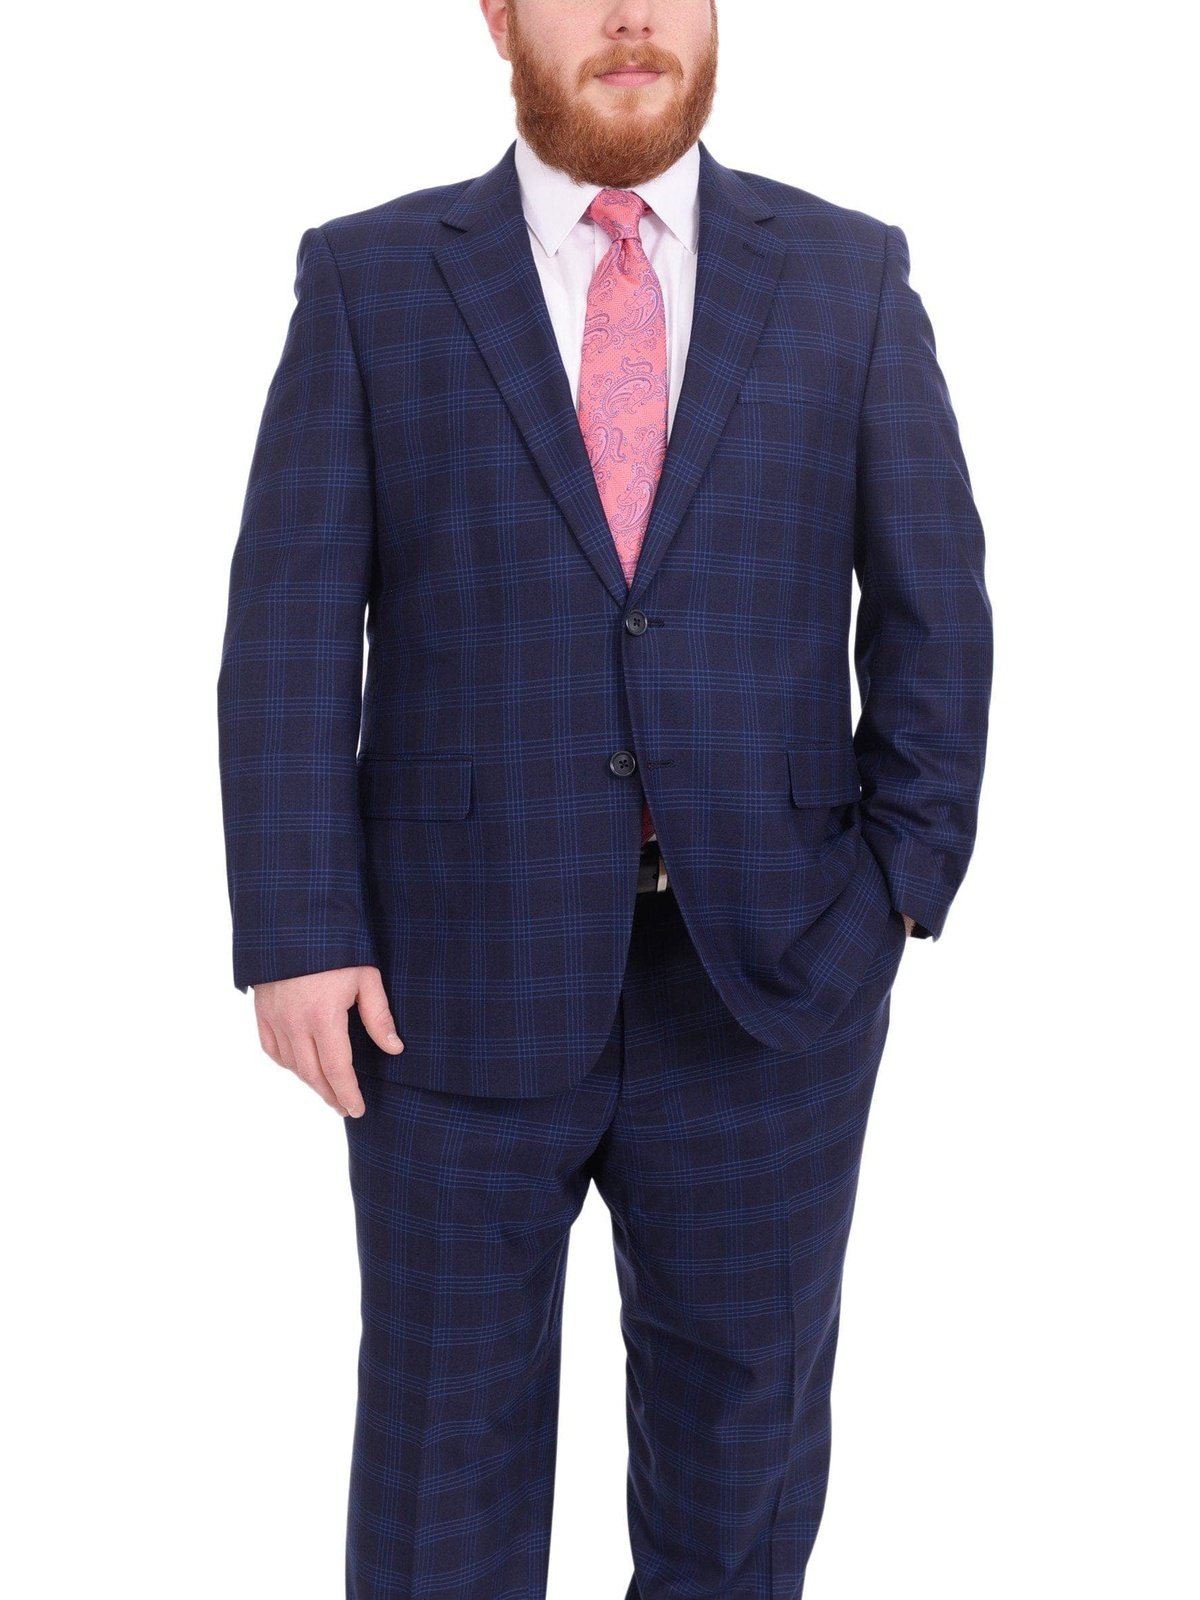 Lazetti Couture Sale Suits Lazetti Couture Portly Fit Blue Plaid Two Button Wool Suit